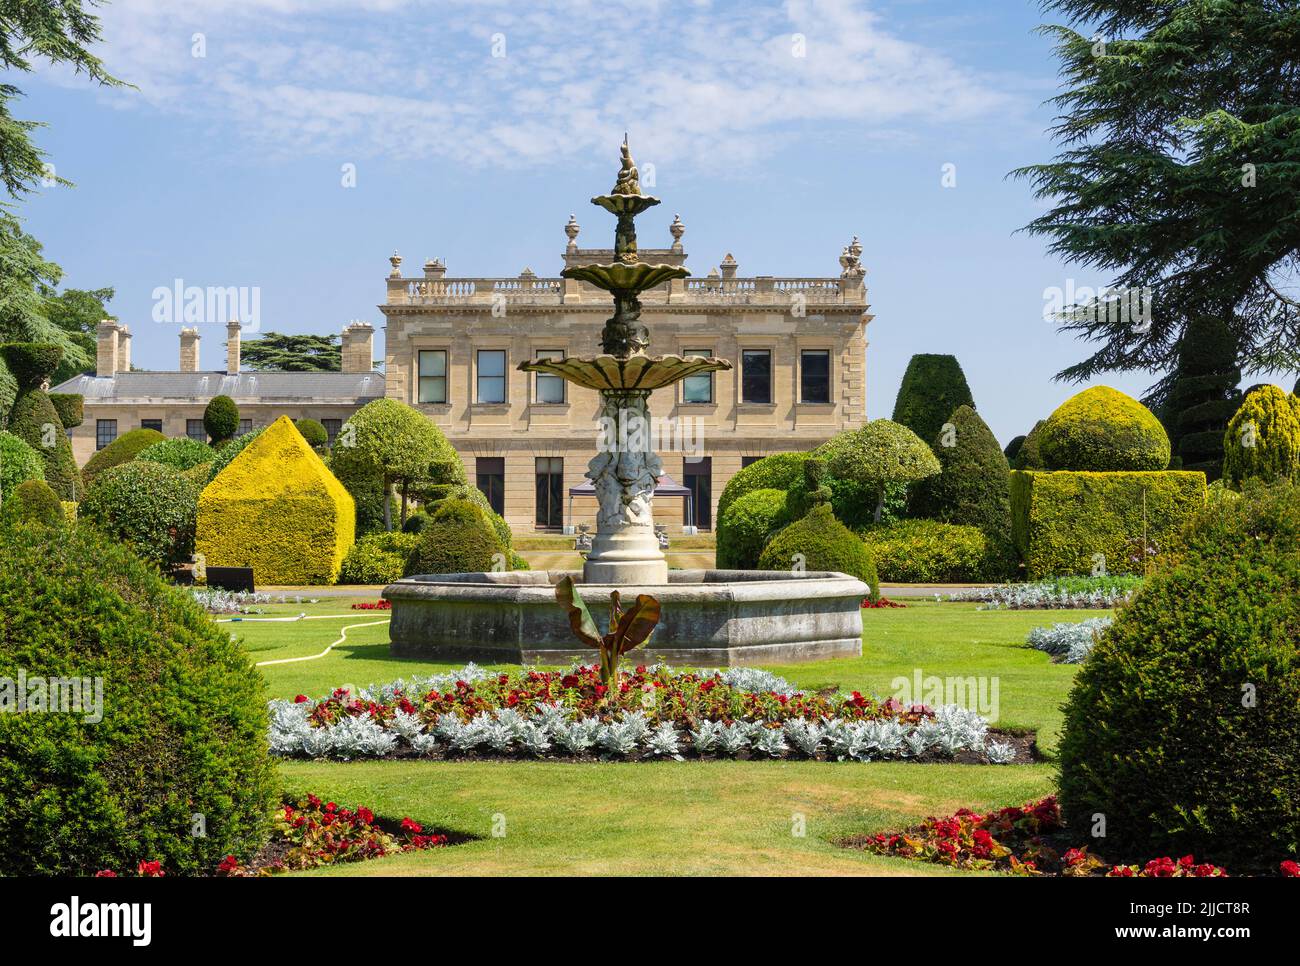 Brodsworth hall and garden Ornamental fountain in the Victorian country house garden at Brodsworth near Doncaster South Yorkshire England uk gb Europe Stock Photo